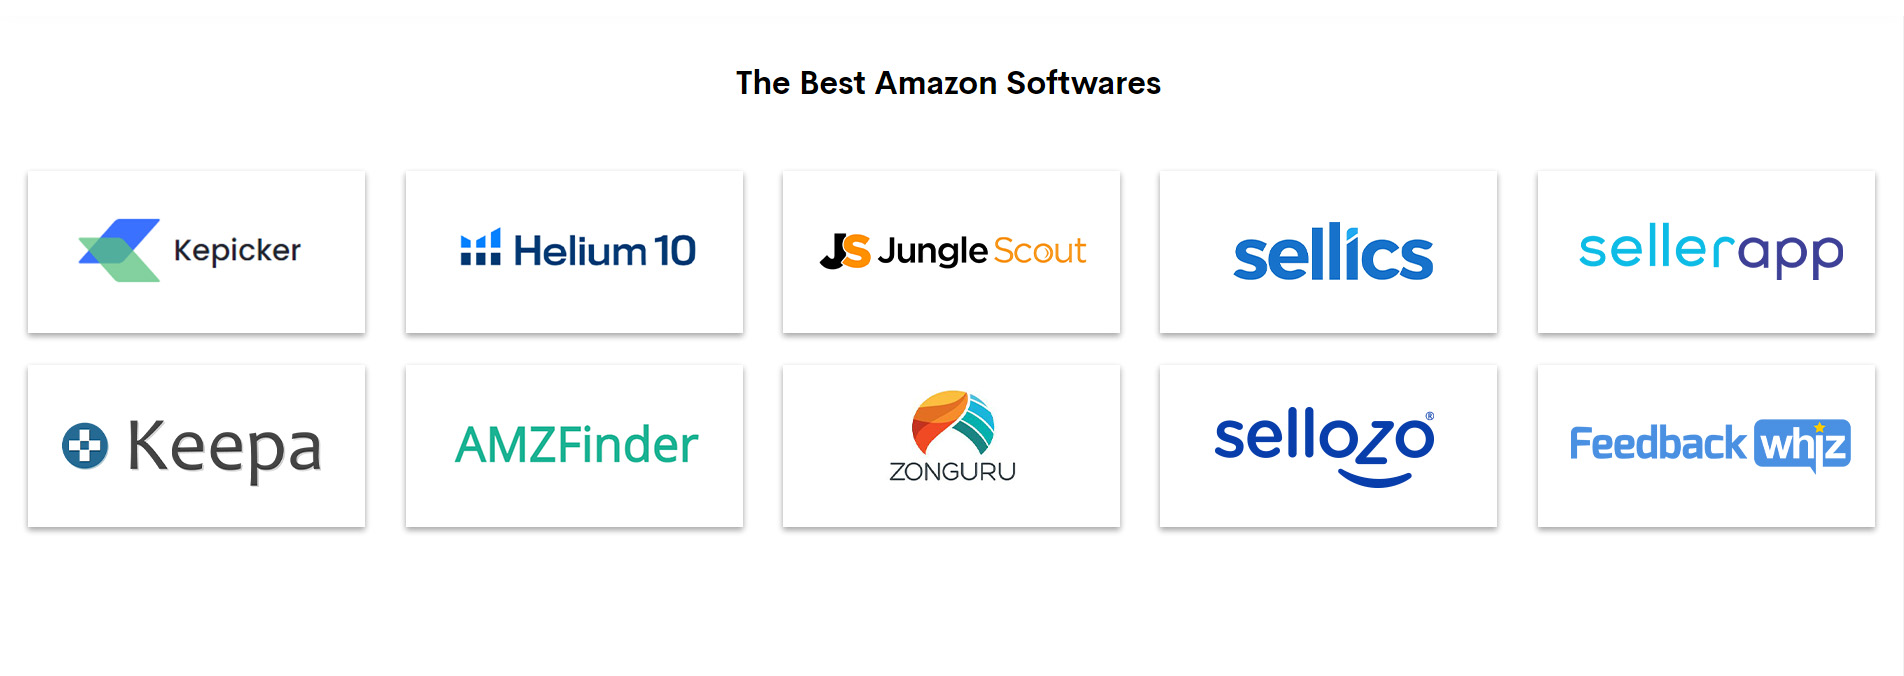 the Best Amazon Softwares